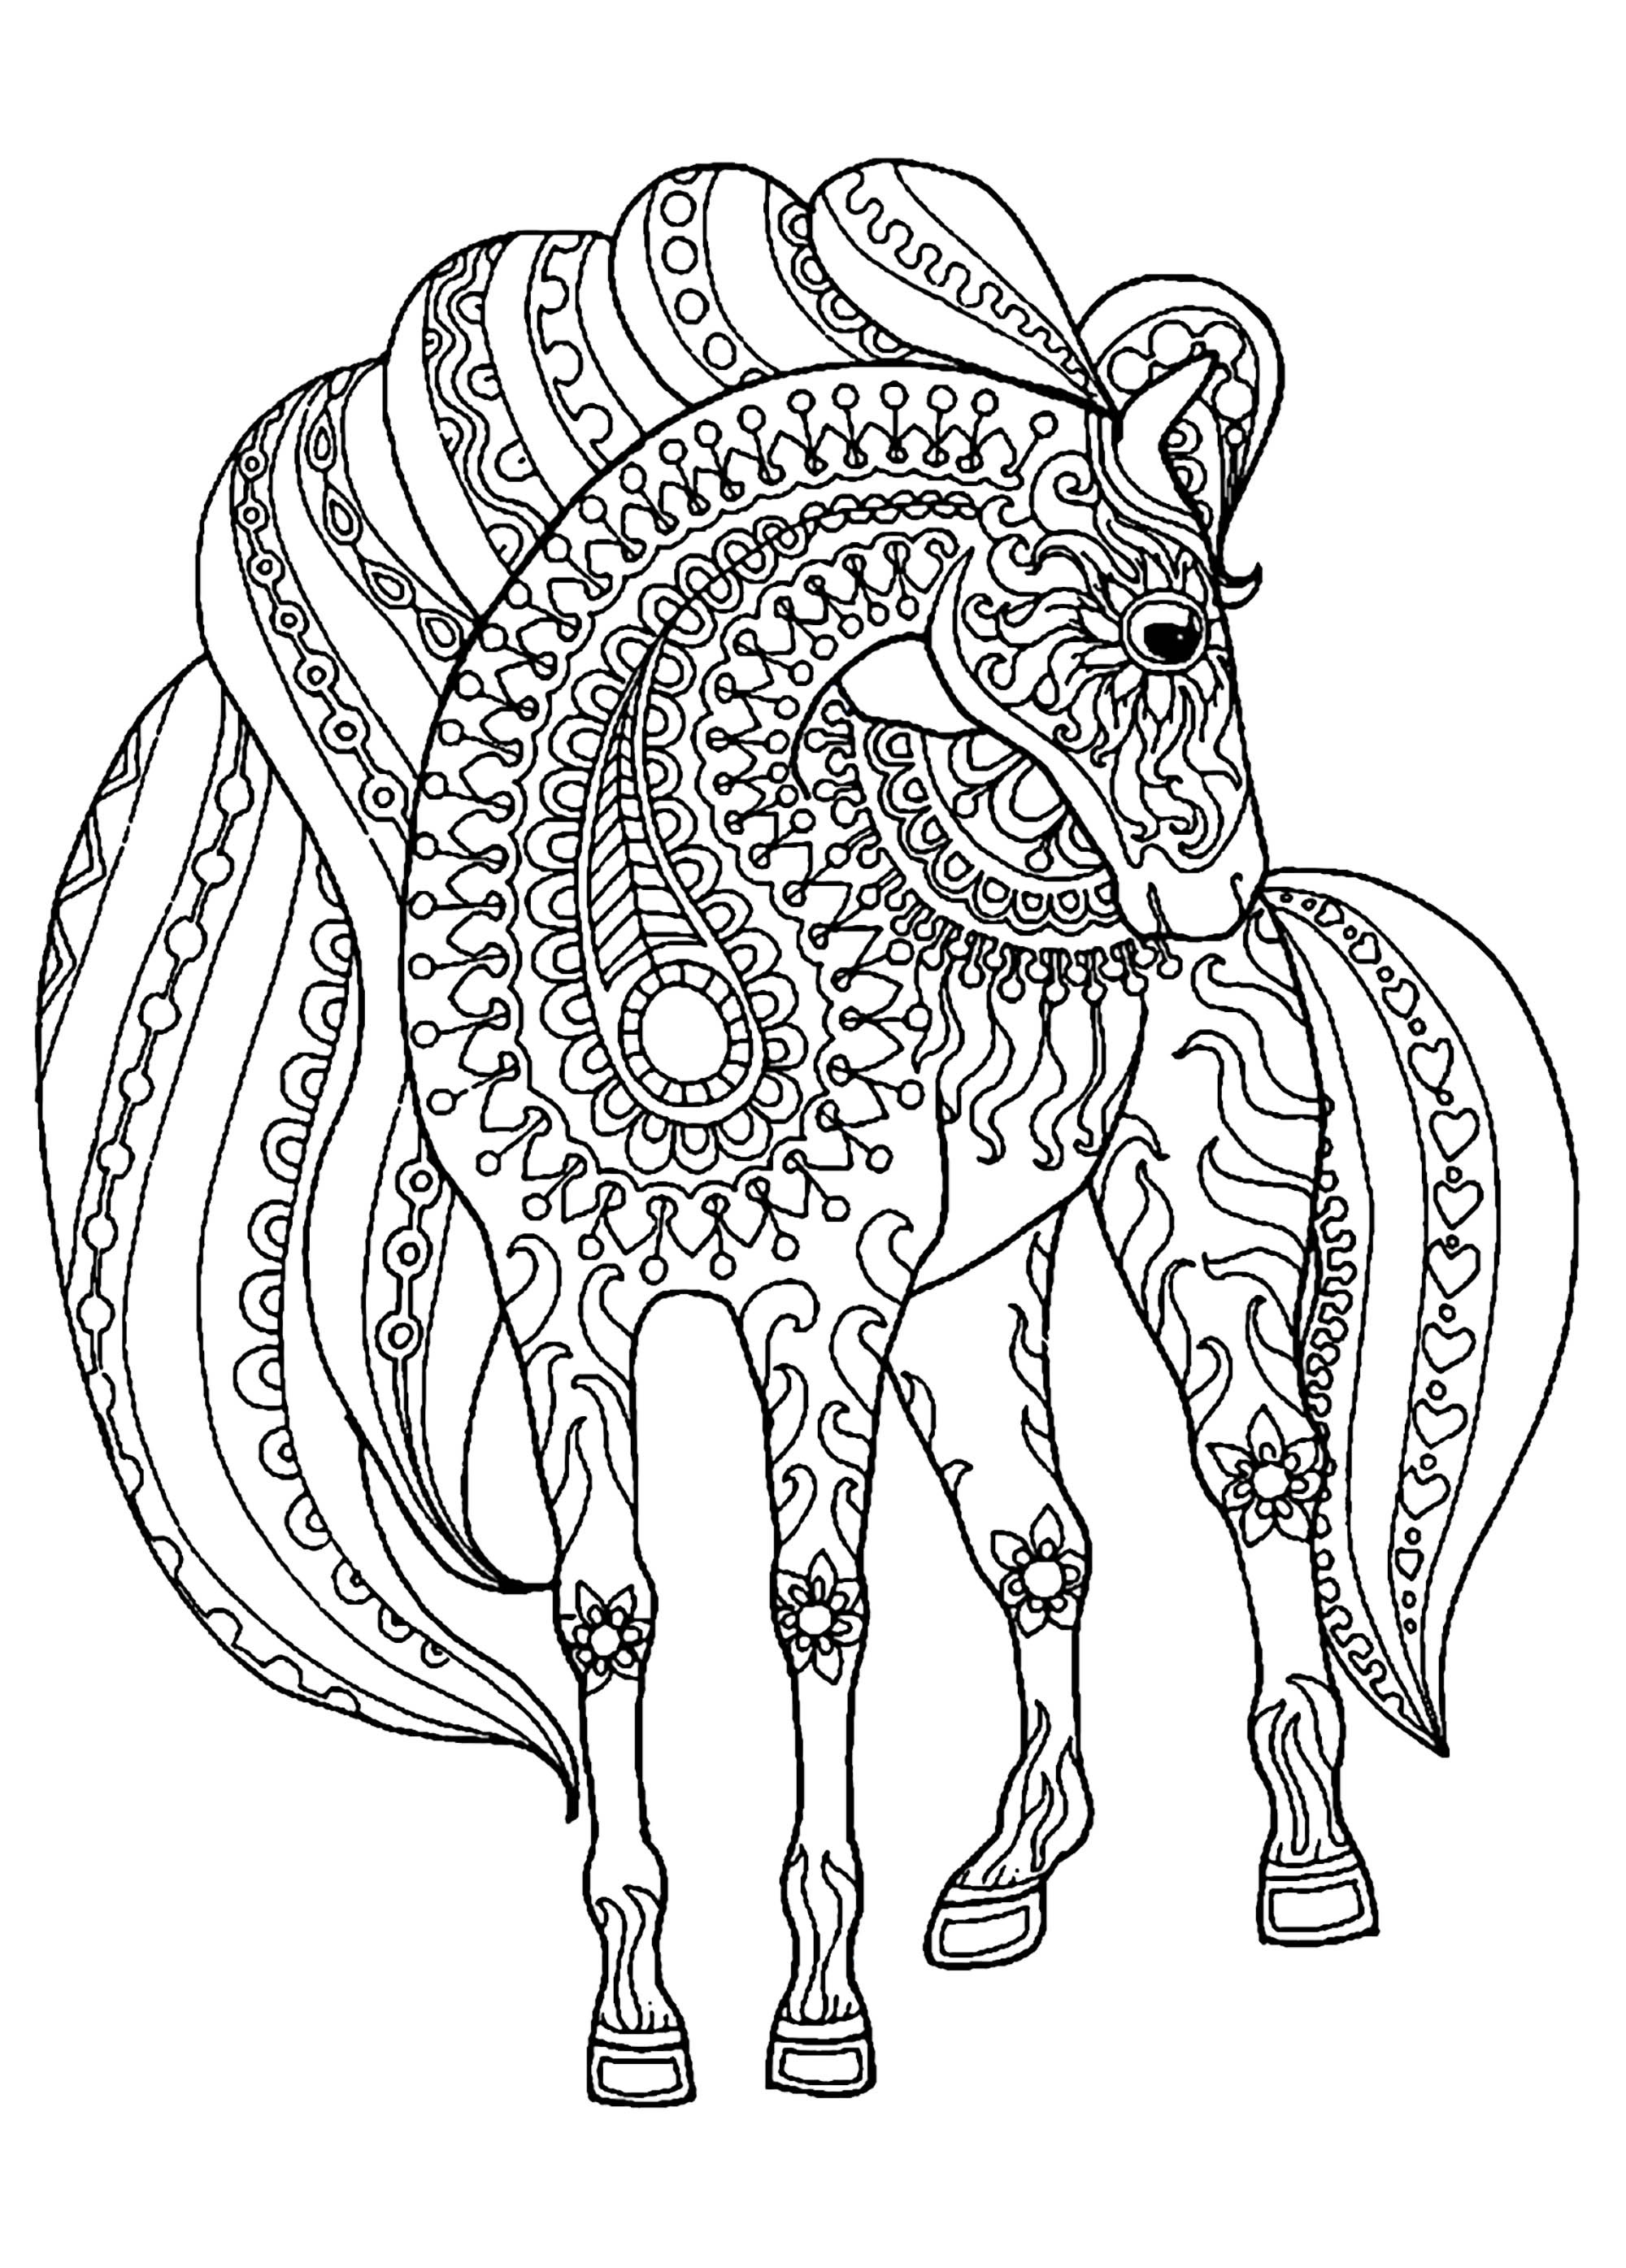 Free Horse Coloring Pages For Adults
 Horse simple zentangle patterns Horses Adult Coloring Pages